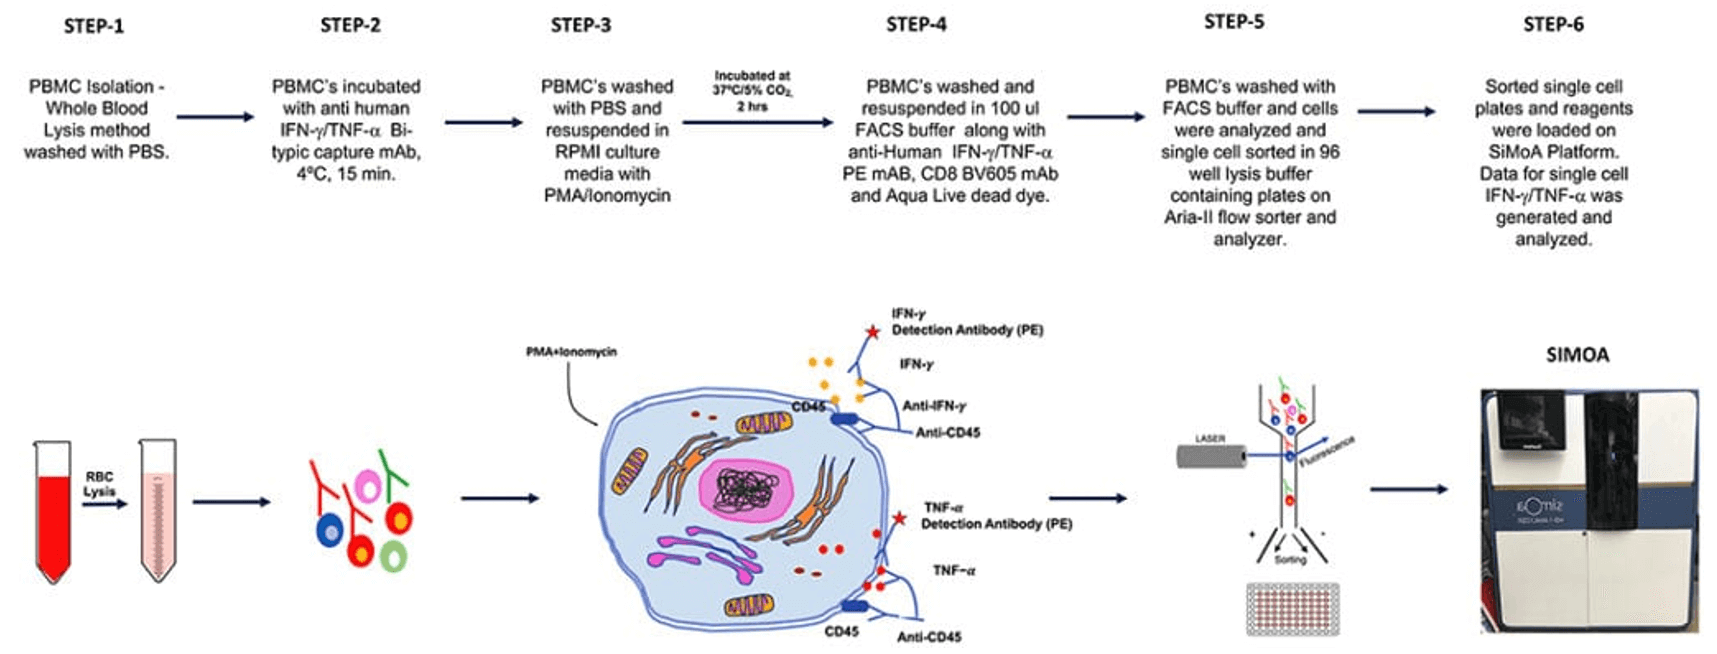 SiMoA schematic workflow showing stepwise procedures performed to quantify cytokines in single cells